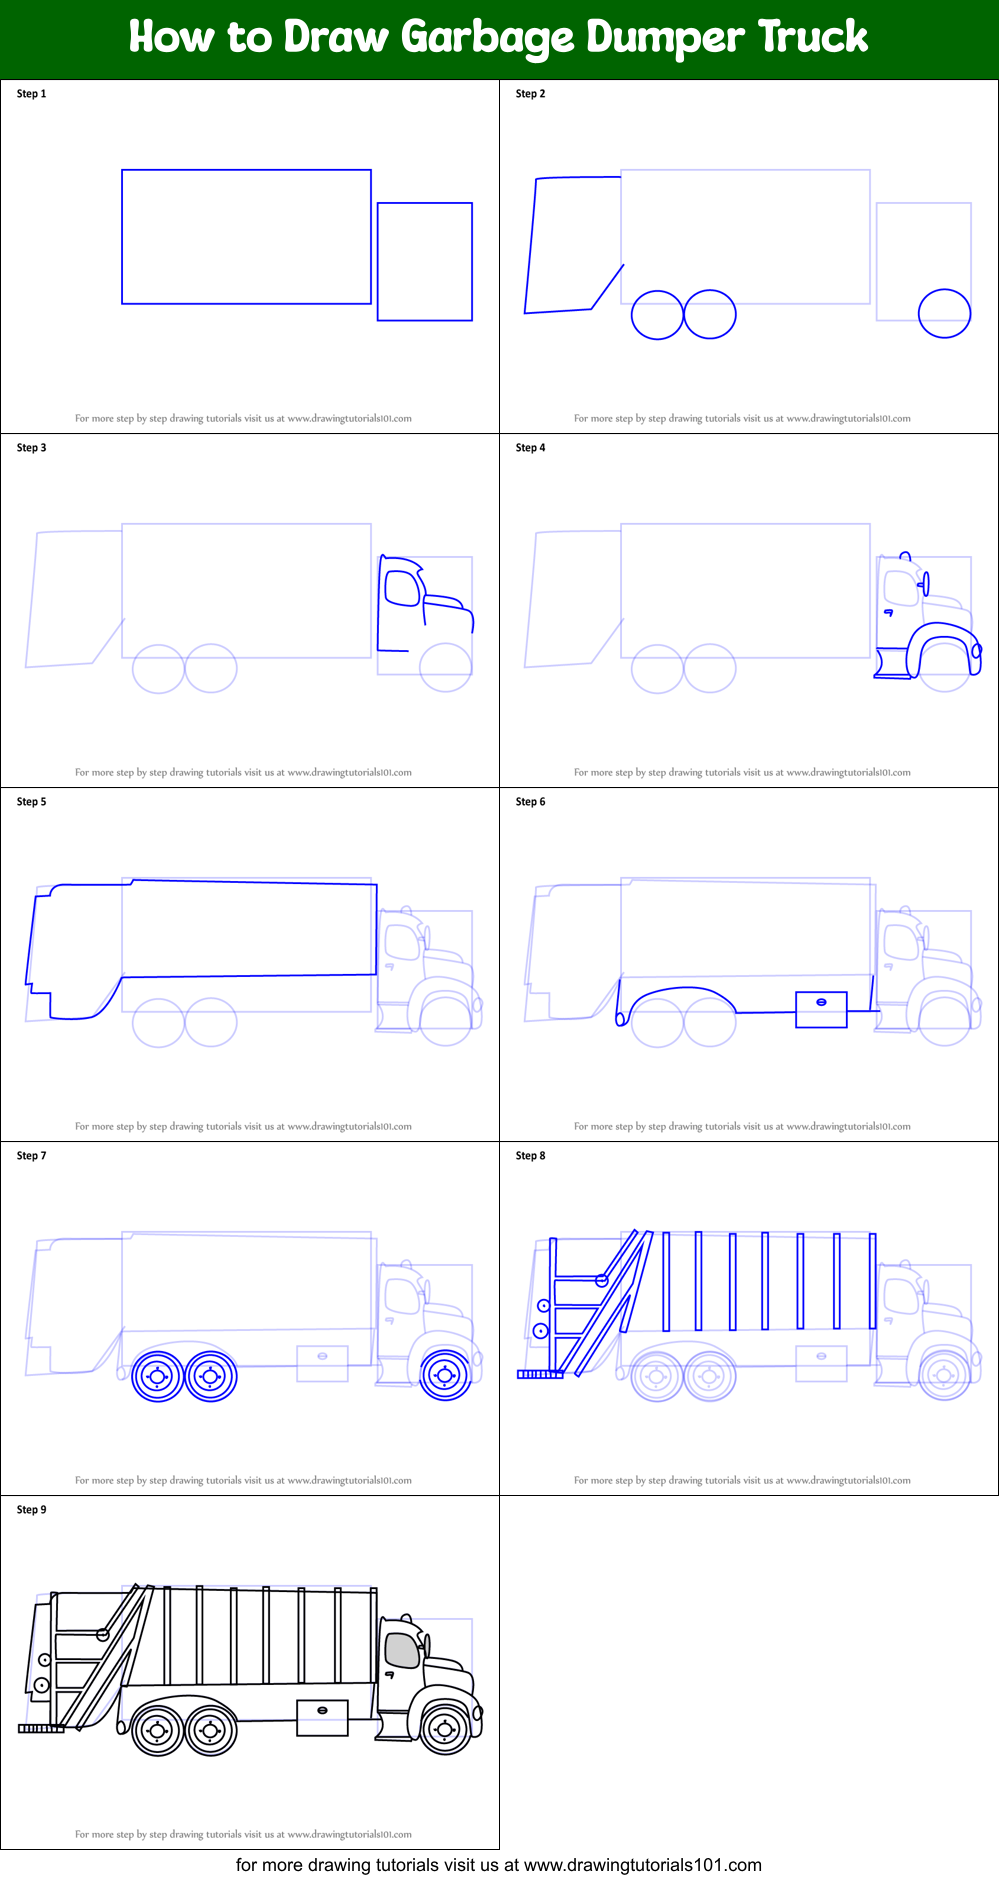 Fire Truck Easy To Draw, HD Png Download , Transparent Png Image - PNGitem